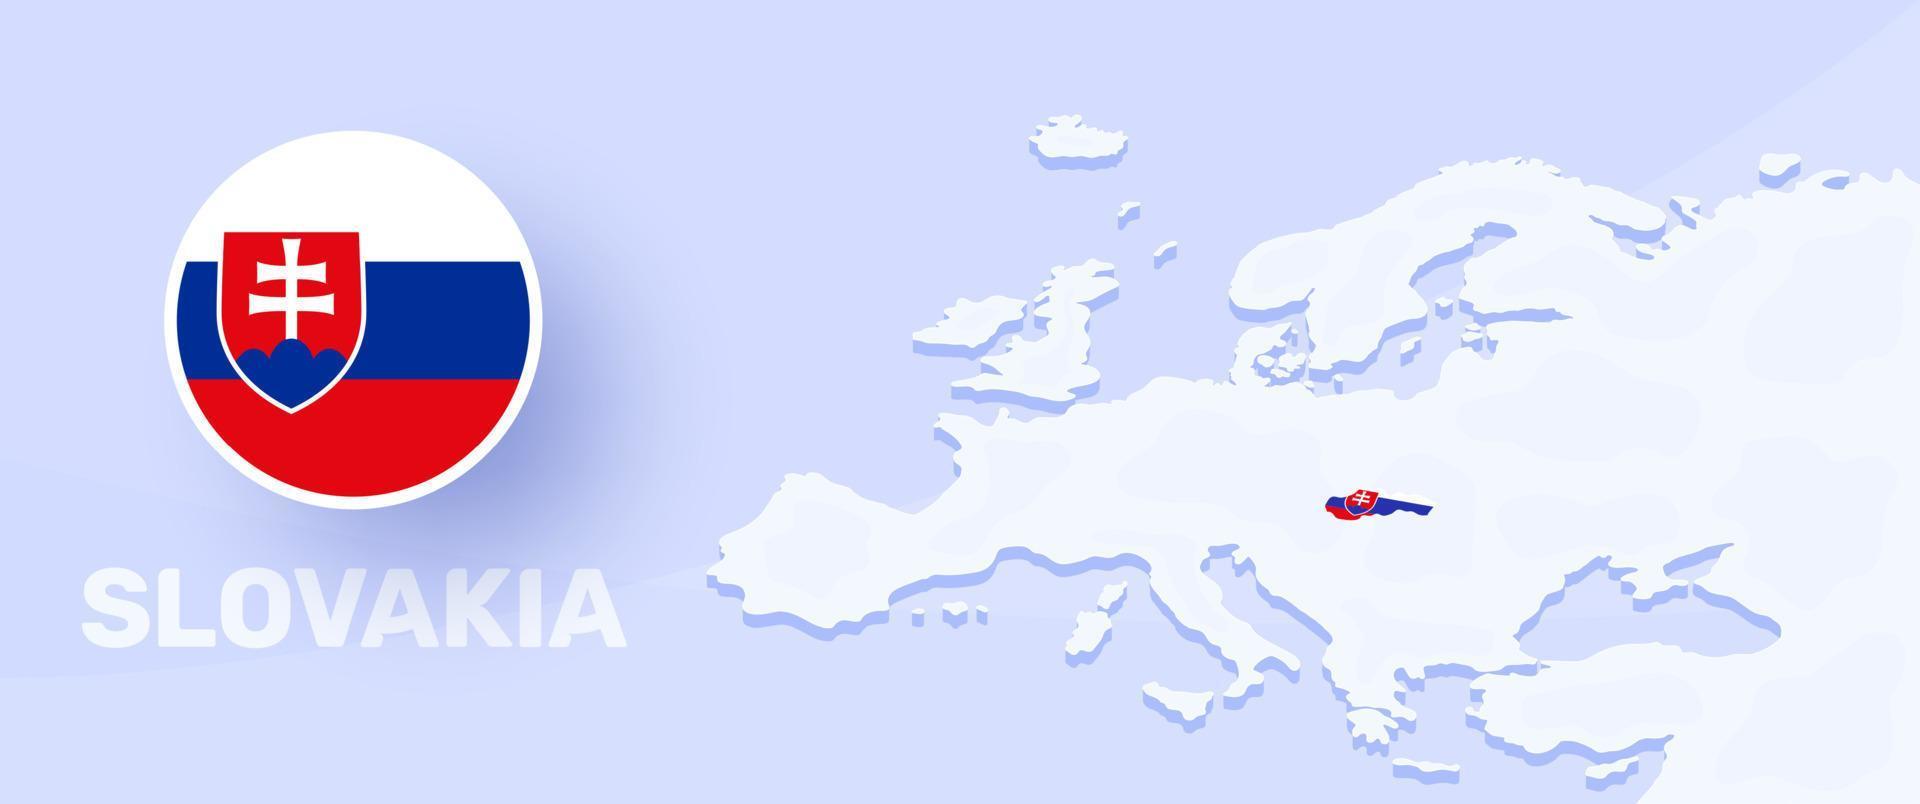 slovakia map flag banner. Vector illustration with a map of Europe and highlighted country with national flag